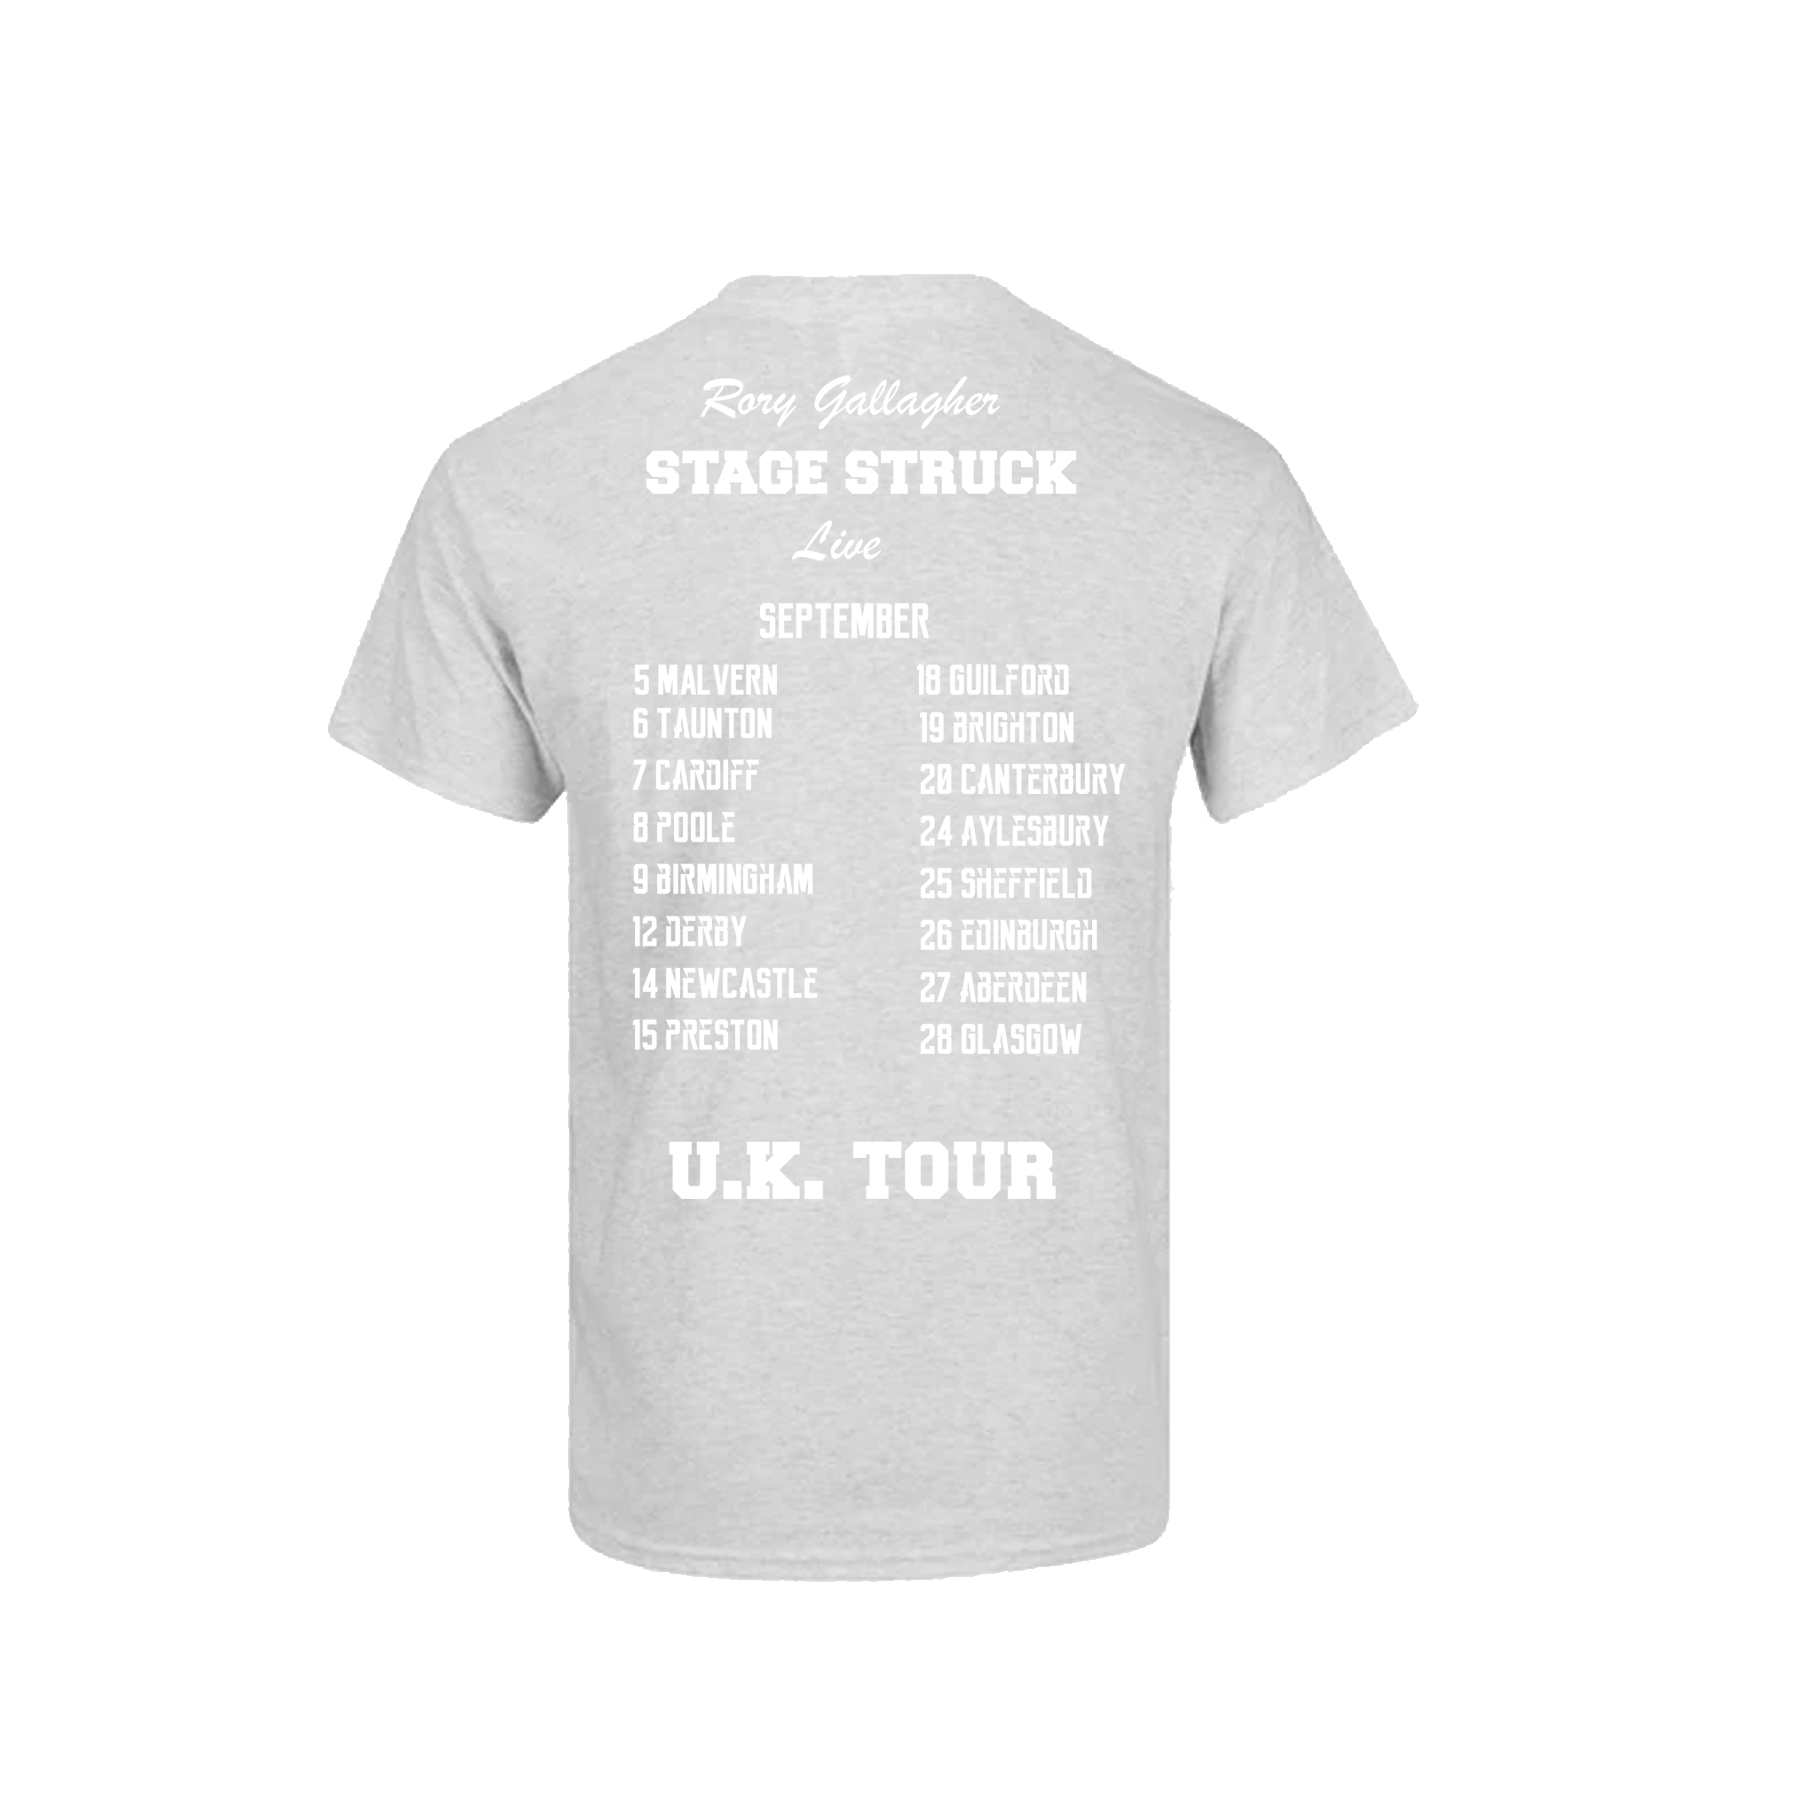 Rory Gallagher - Rory Gallagher - Official Stage Struck Vintage September 1980 Tour T-shirt